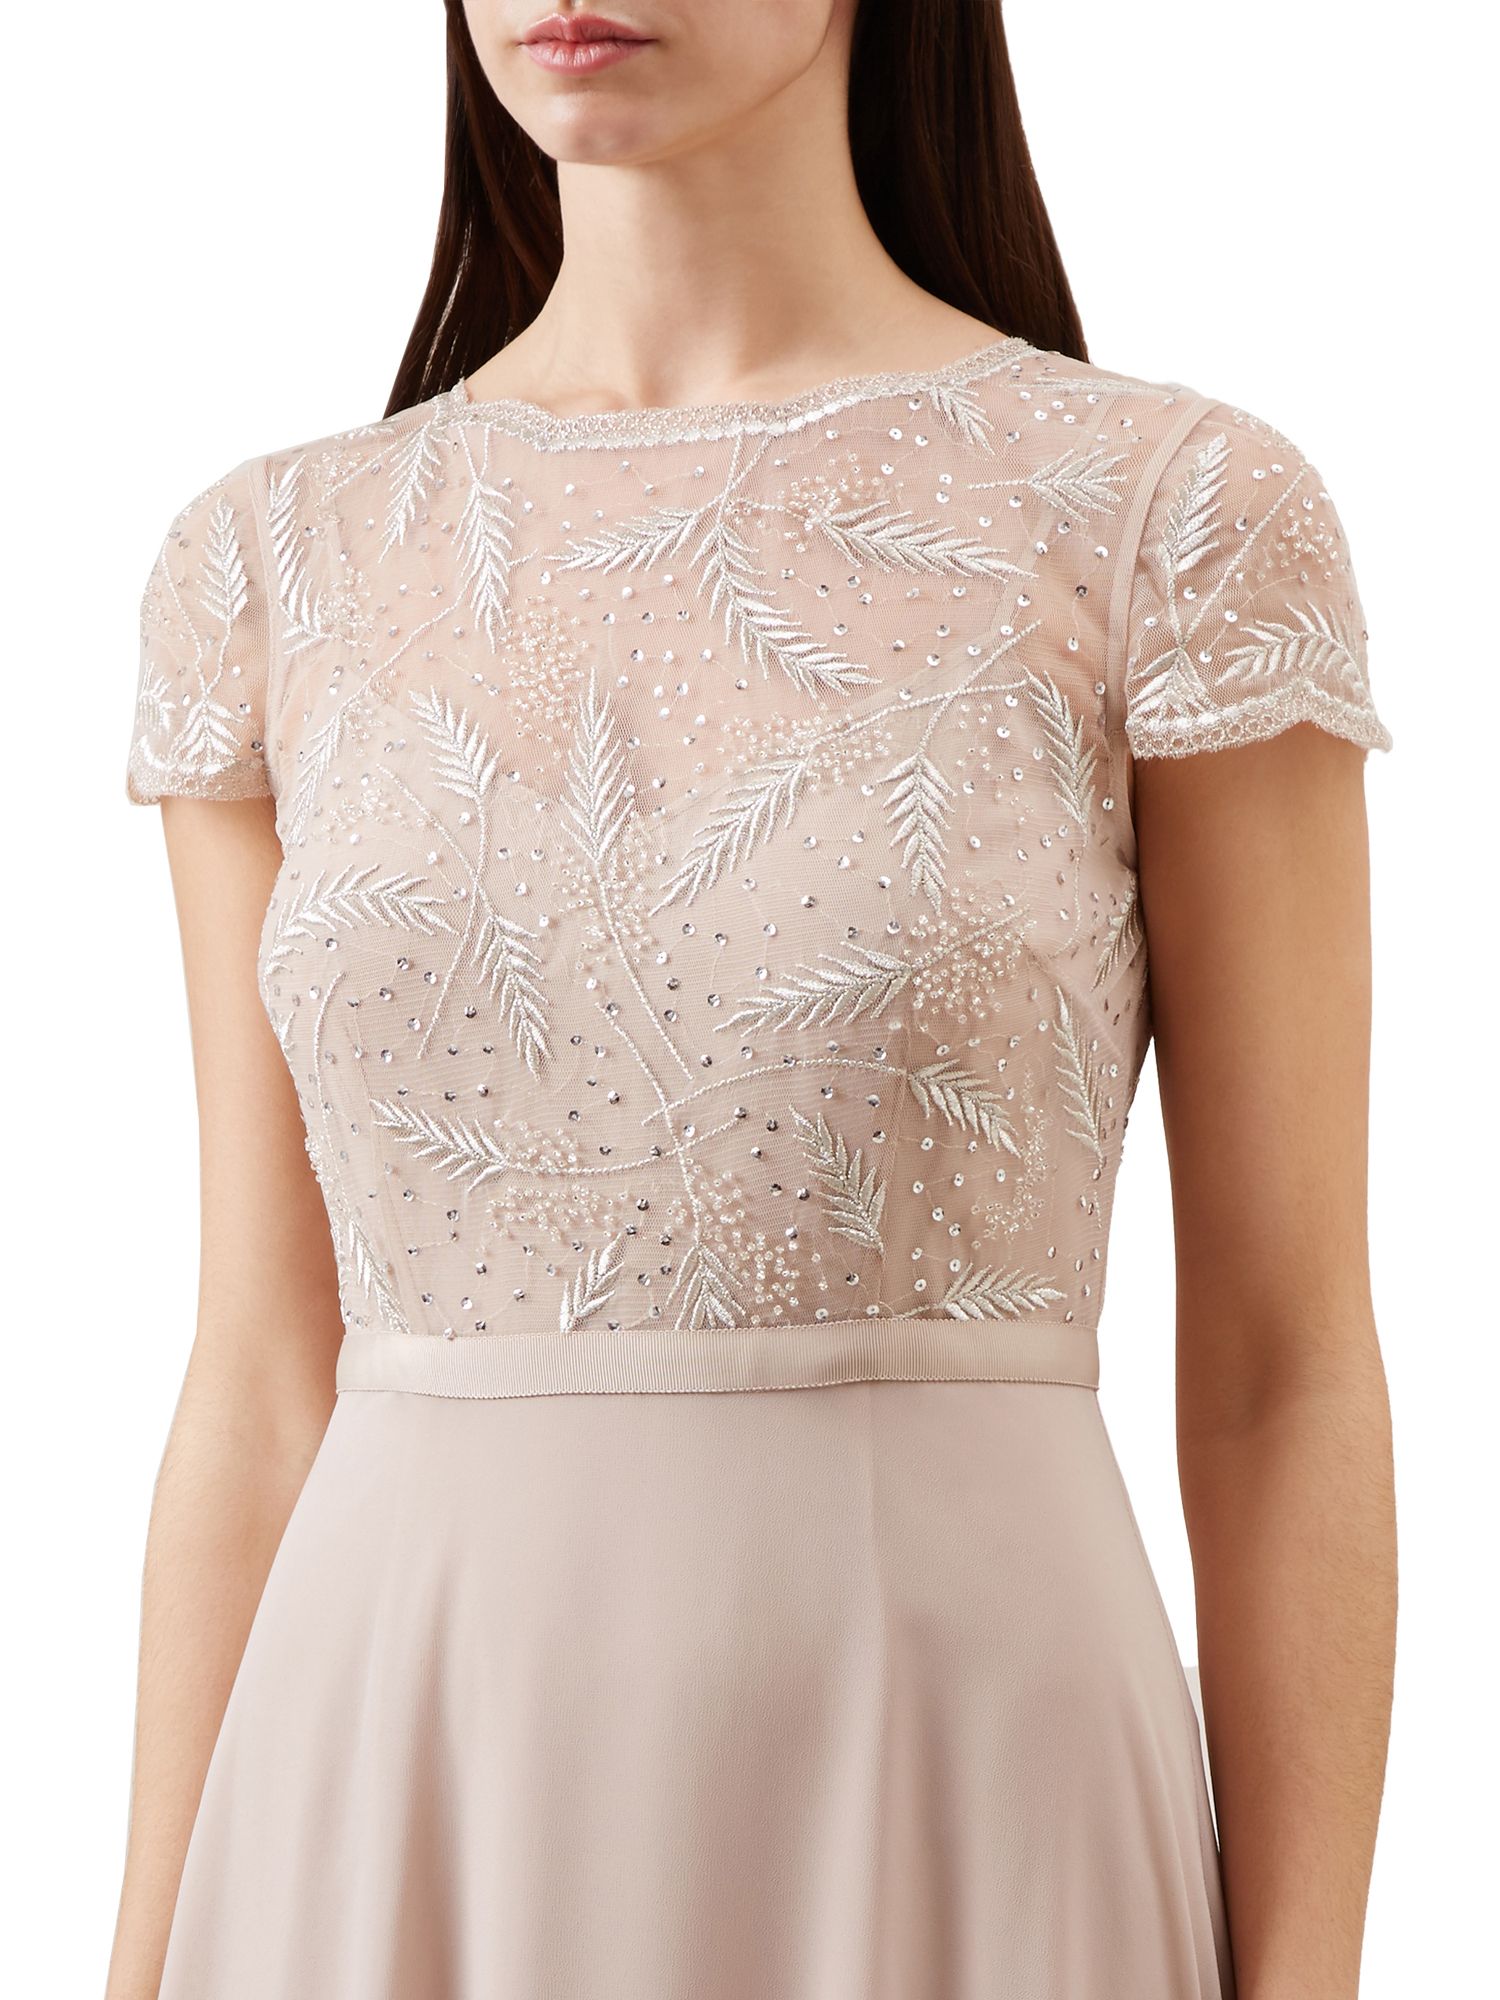 lace for wedding dress to buy